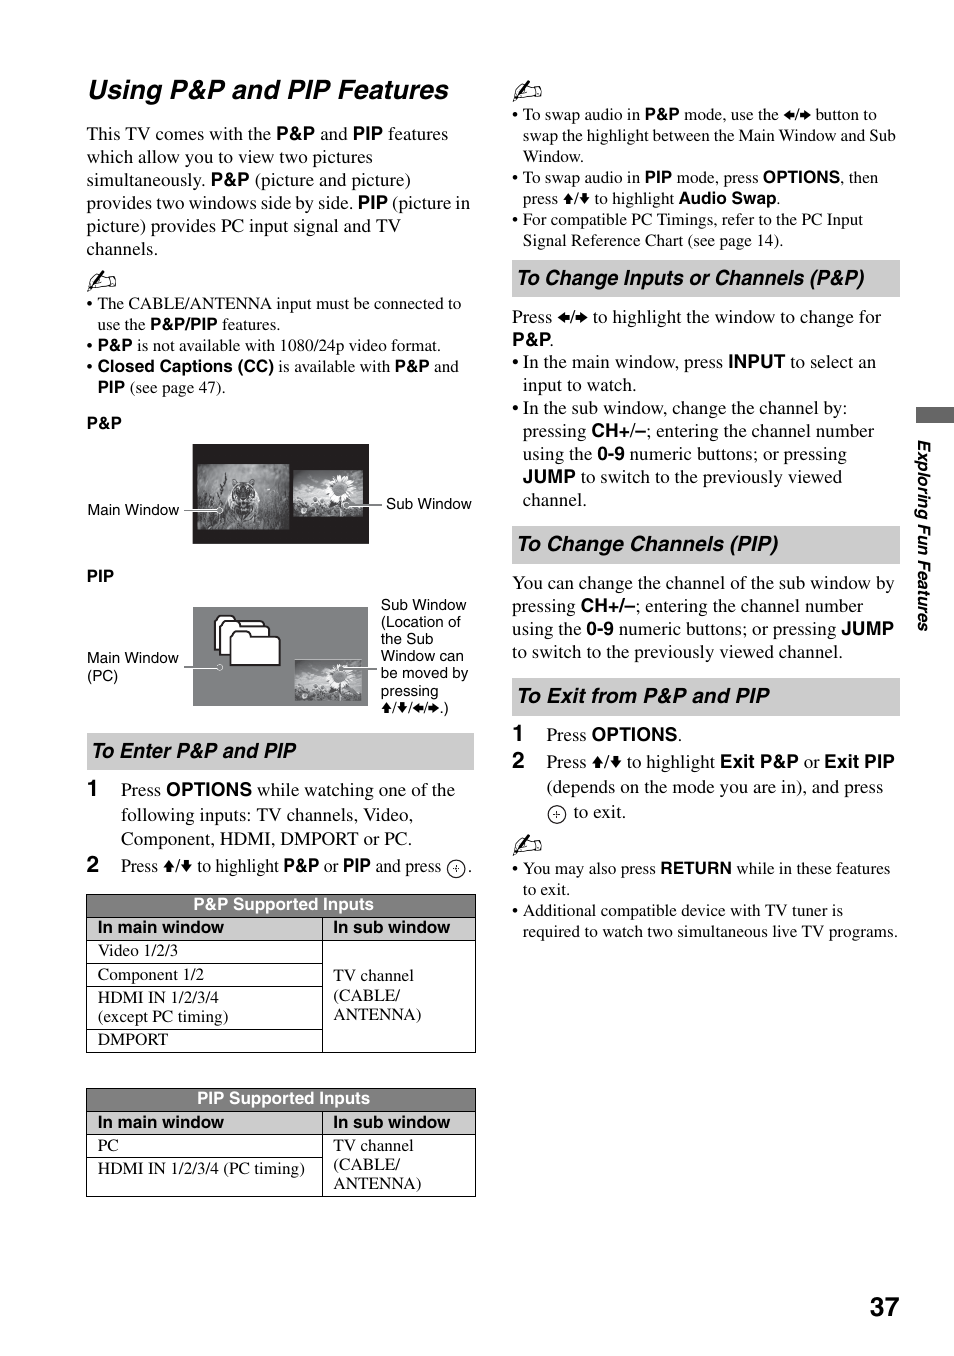 Using p&p and pip features, To enter p&p and pip, To change inputs or channels (p&p) | To change channels (pip), To exit from p&p and pip | Sony KDL-52XBR7 User Manual | Page 37 / 60